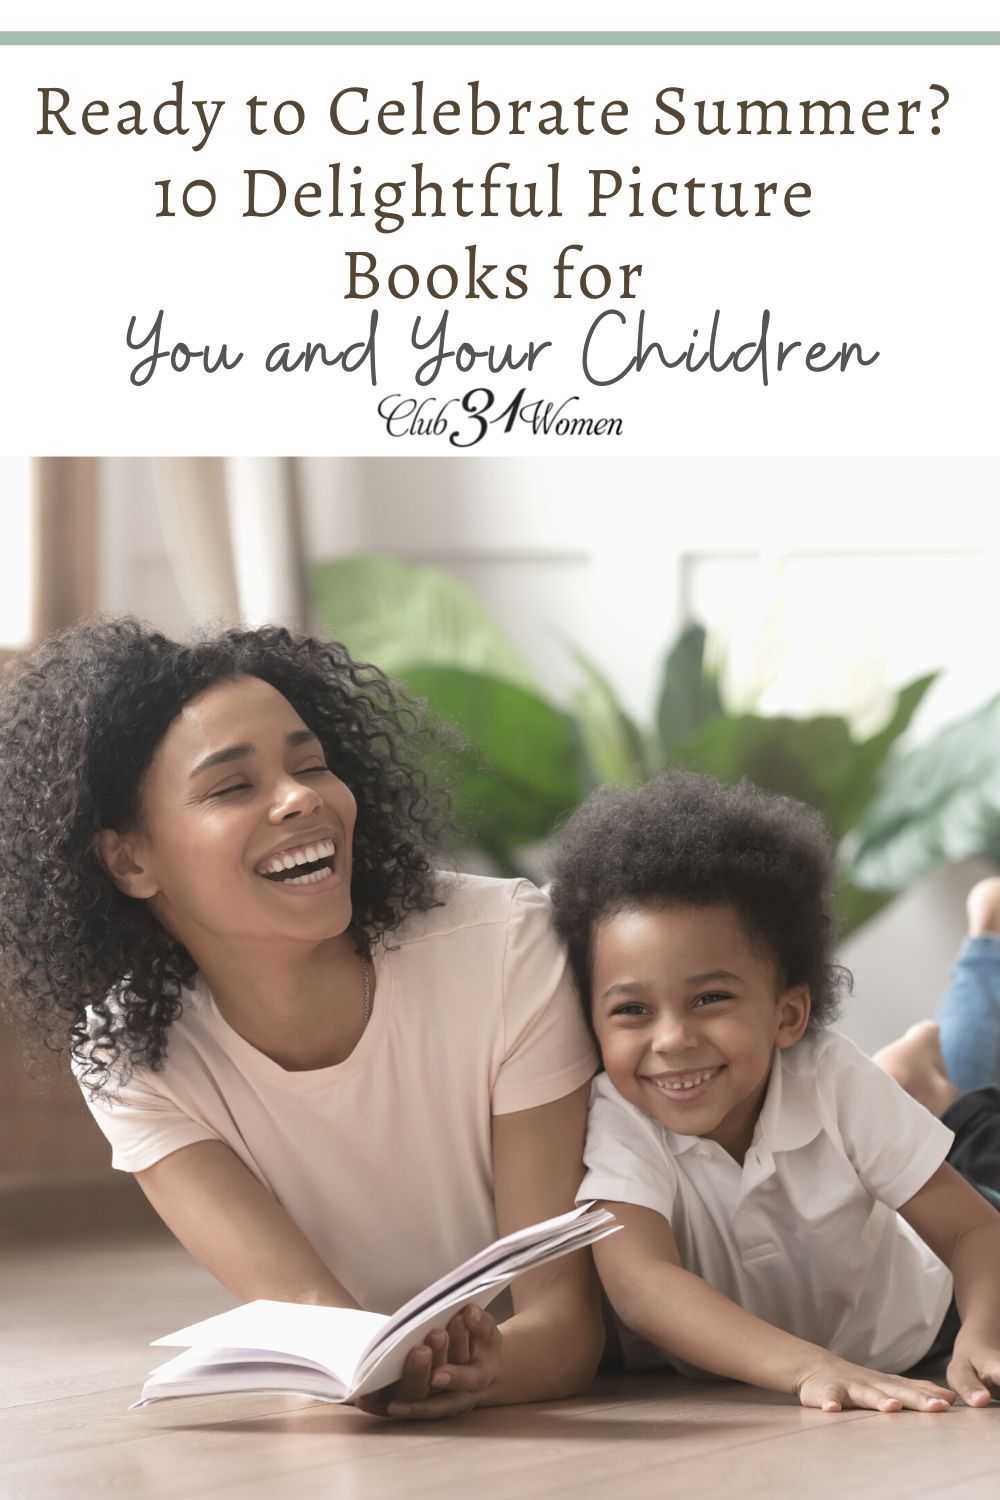 Having a stack of picture books during a rainy summer day is a great way to make memories with your children! Here are some fine suggestions! via @Club31Women